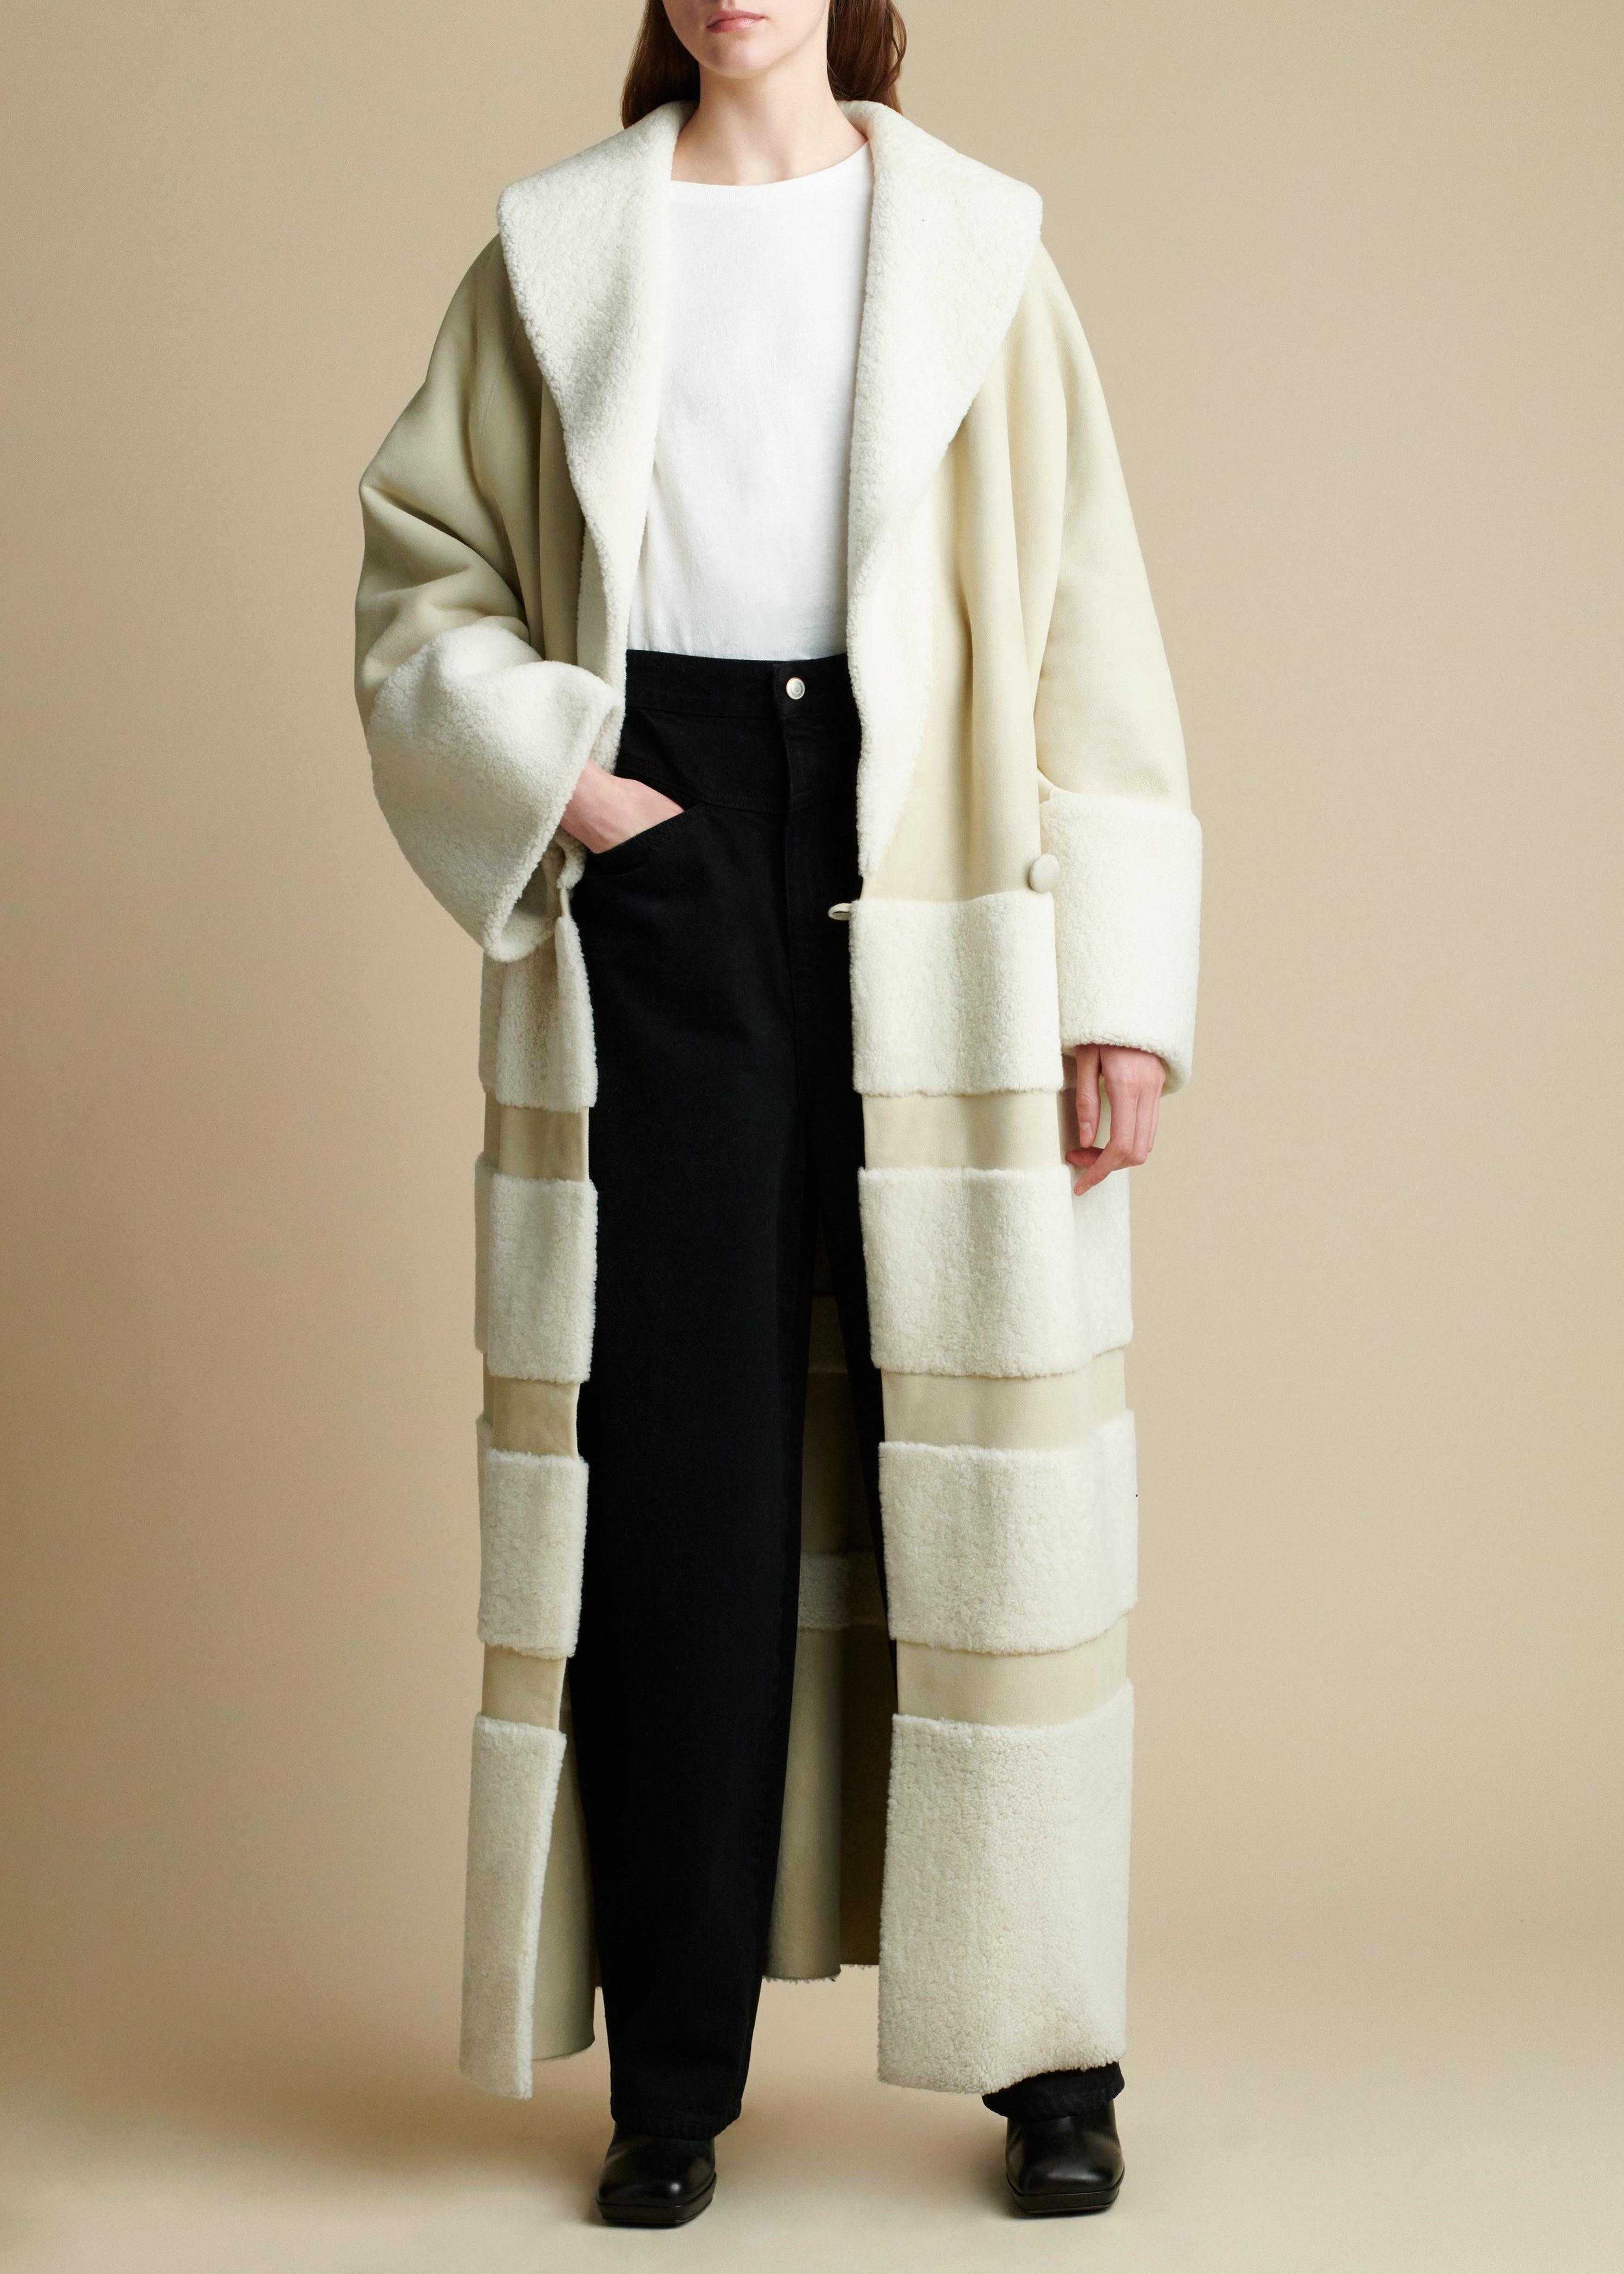 The Pia Shearling Coat in Bone - The Iconic Issue